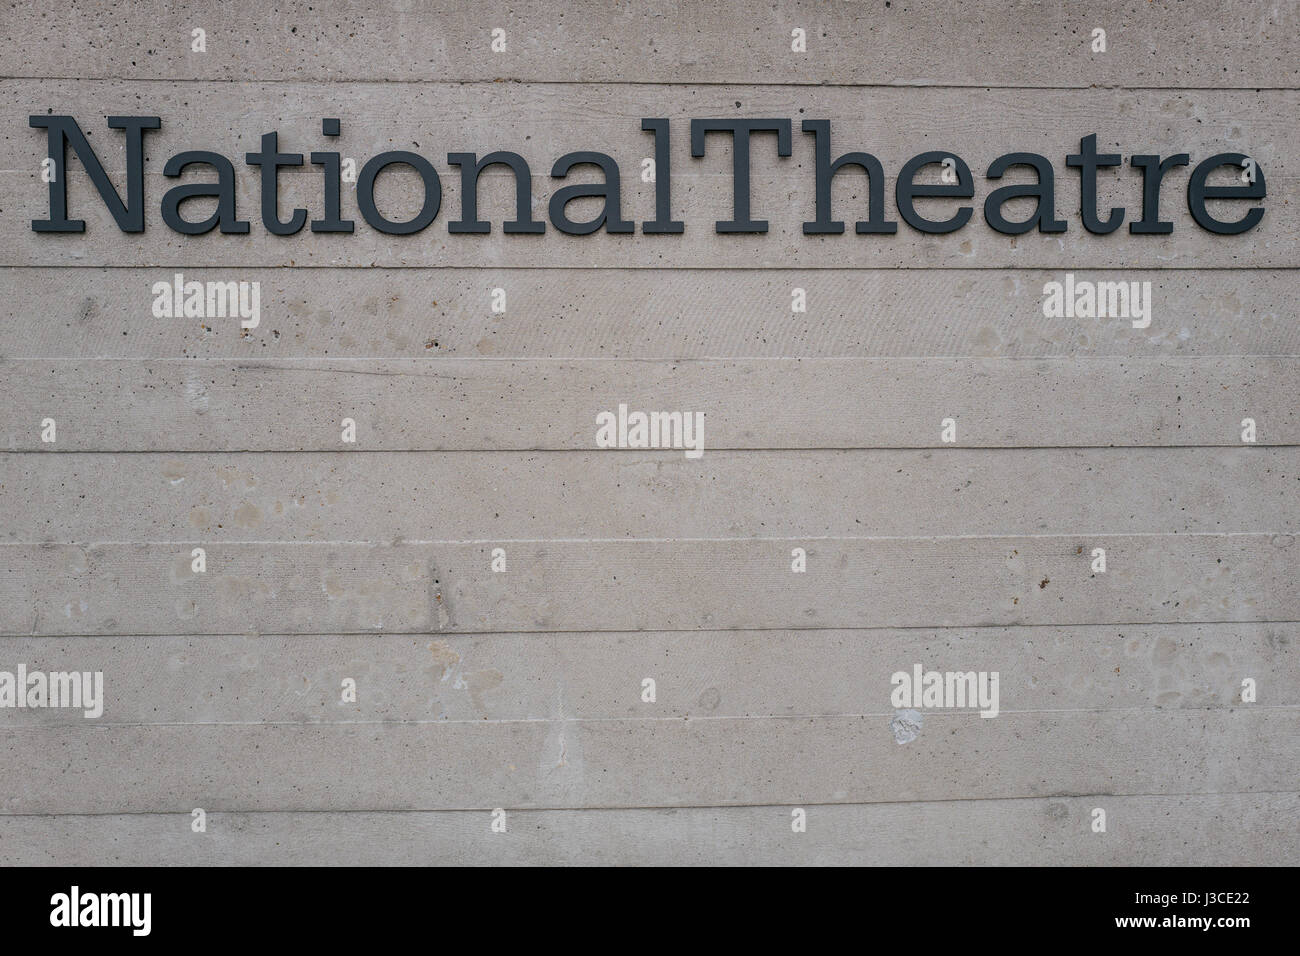 The National Theatre of Great Britain at the Southbank Centre, London. Designed by Denys Lasdun, the building is a famous example of brutalism. Stock Photo